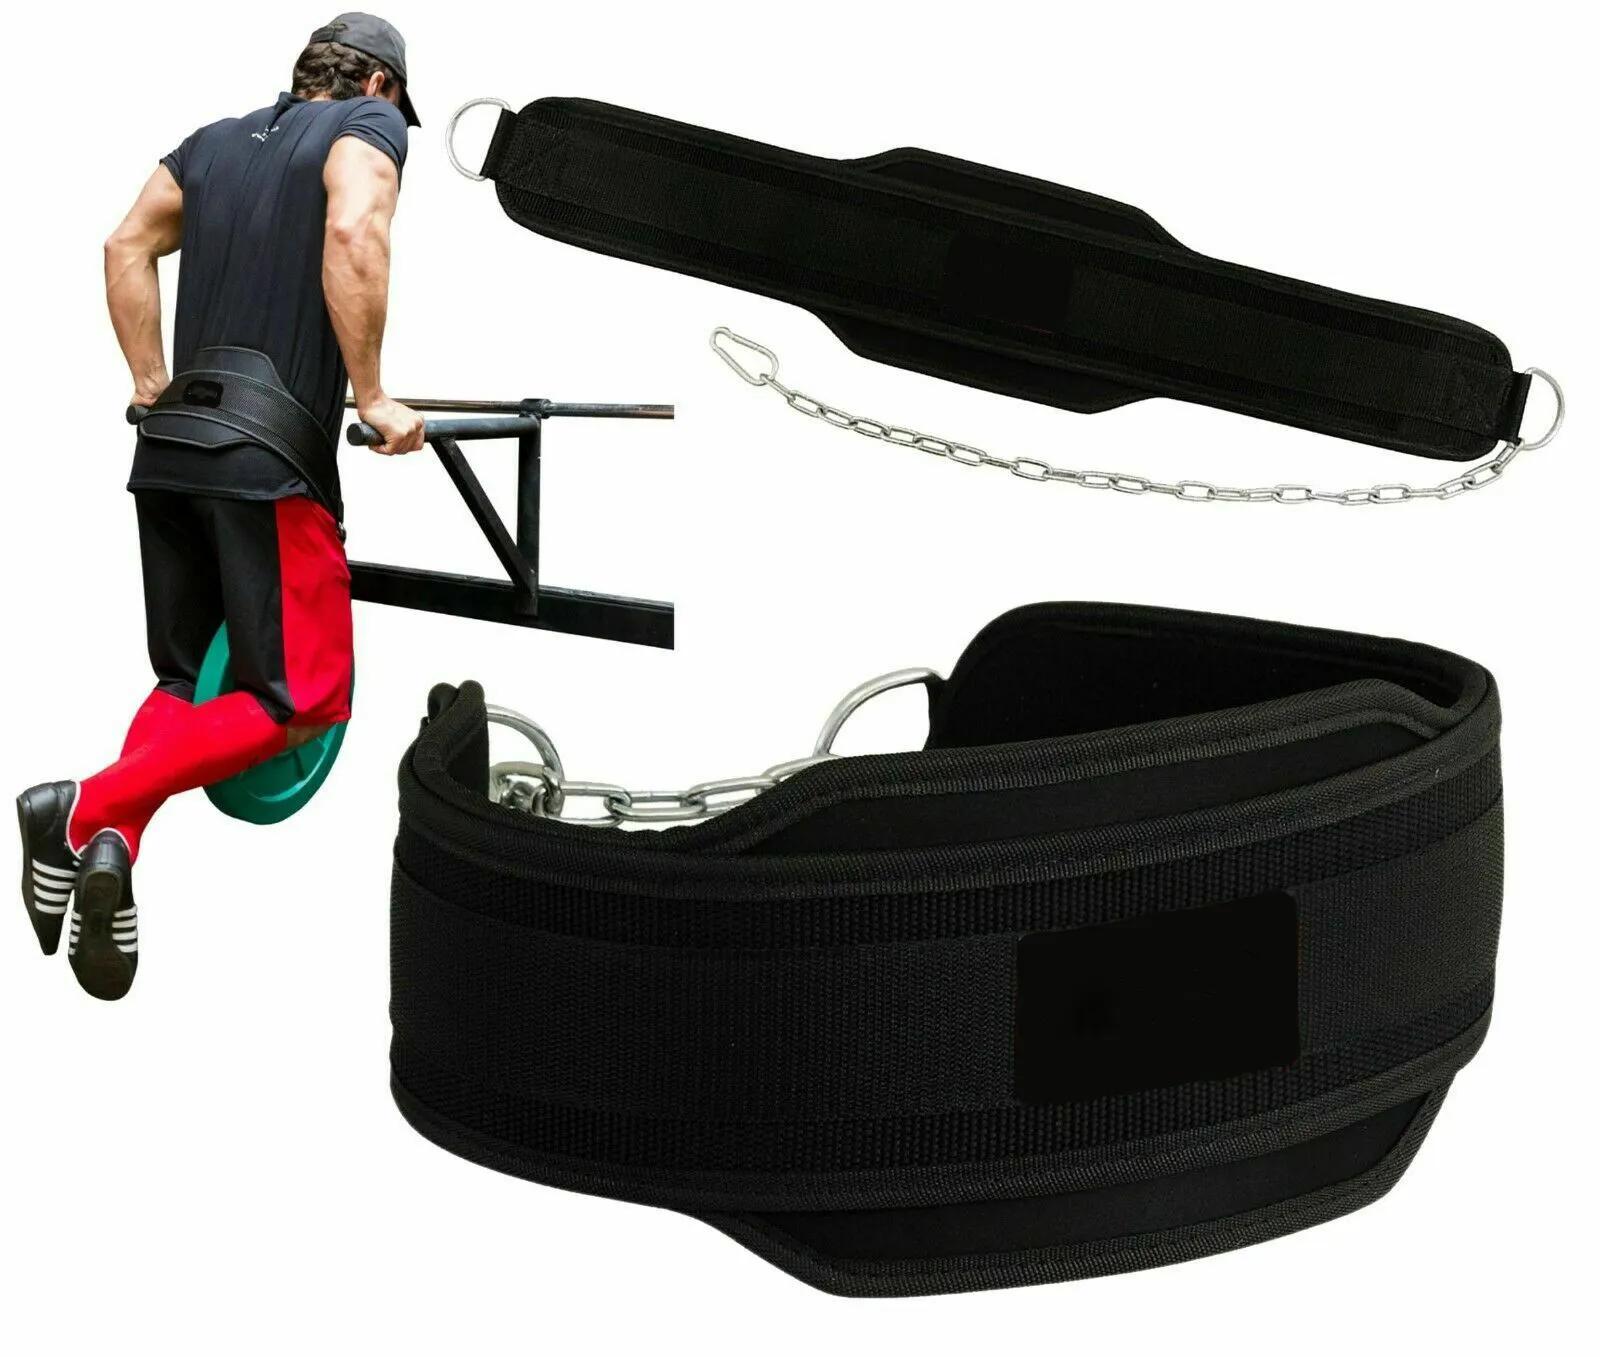 Weightlifting Dipping Belt Chain Weight Lifting Gym Fitness Exercise Weight Belts Pull up Belt Steel Neoprene Gym accessories